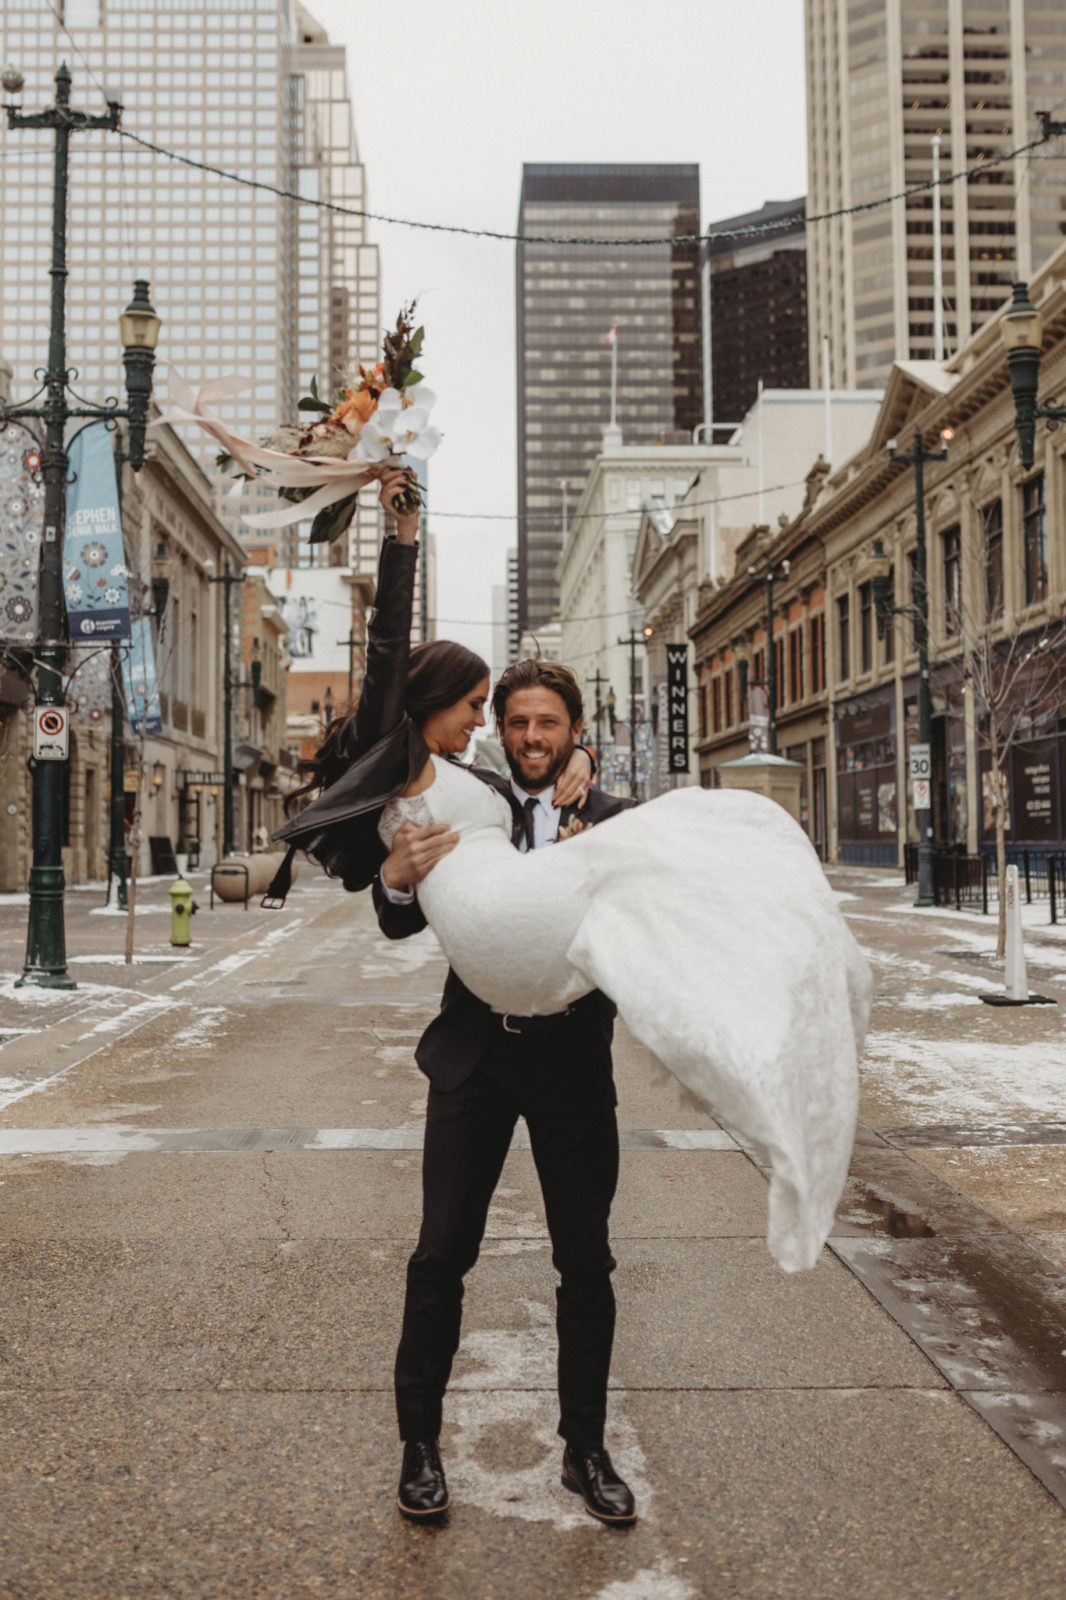 Groom pick up his leather jacket wearing bride in the streets of downtown Calgary